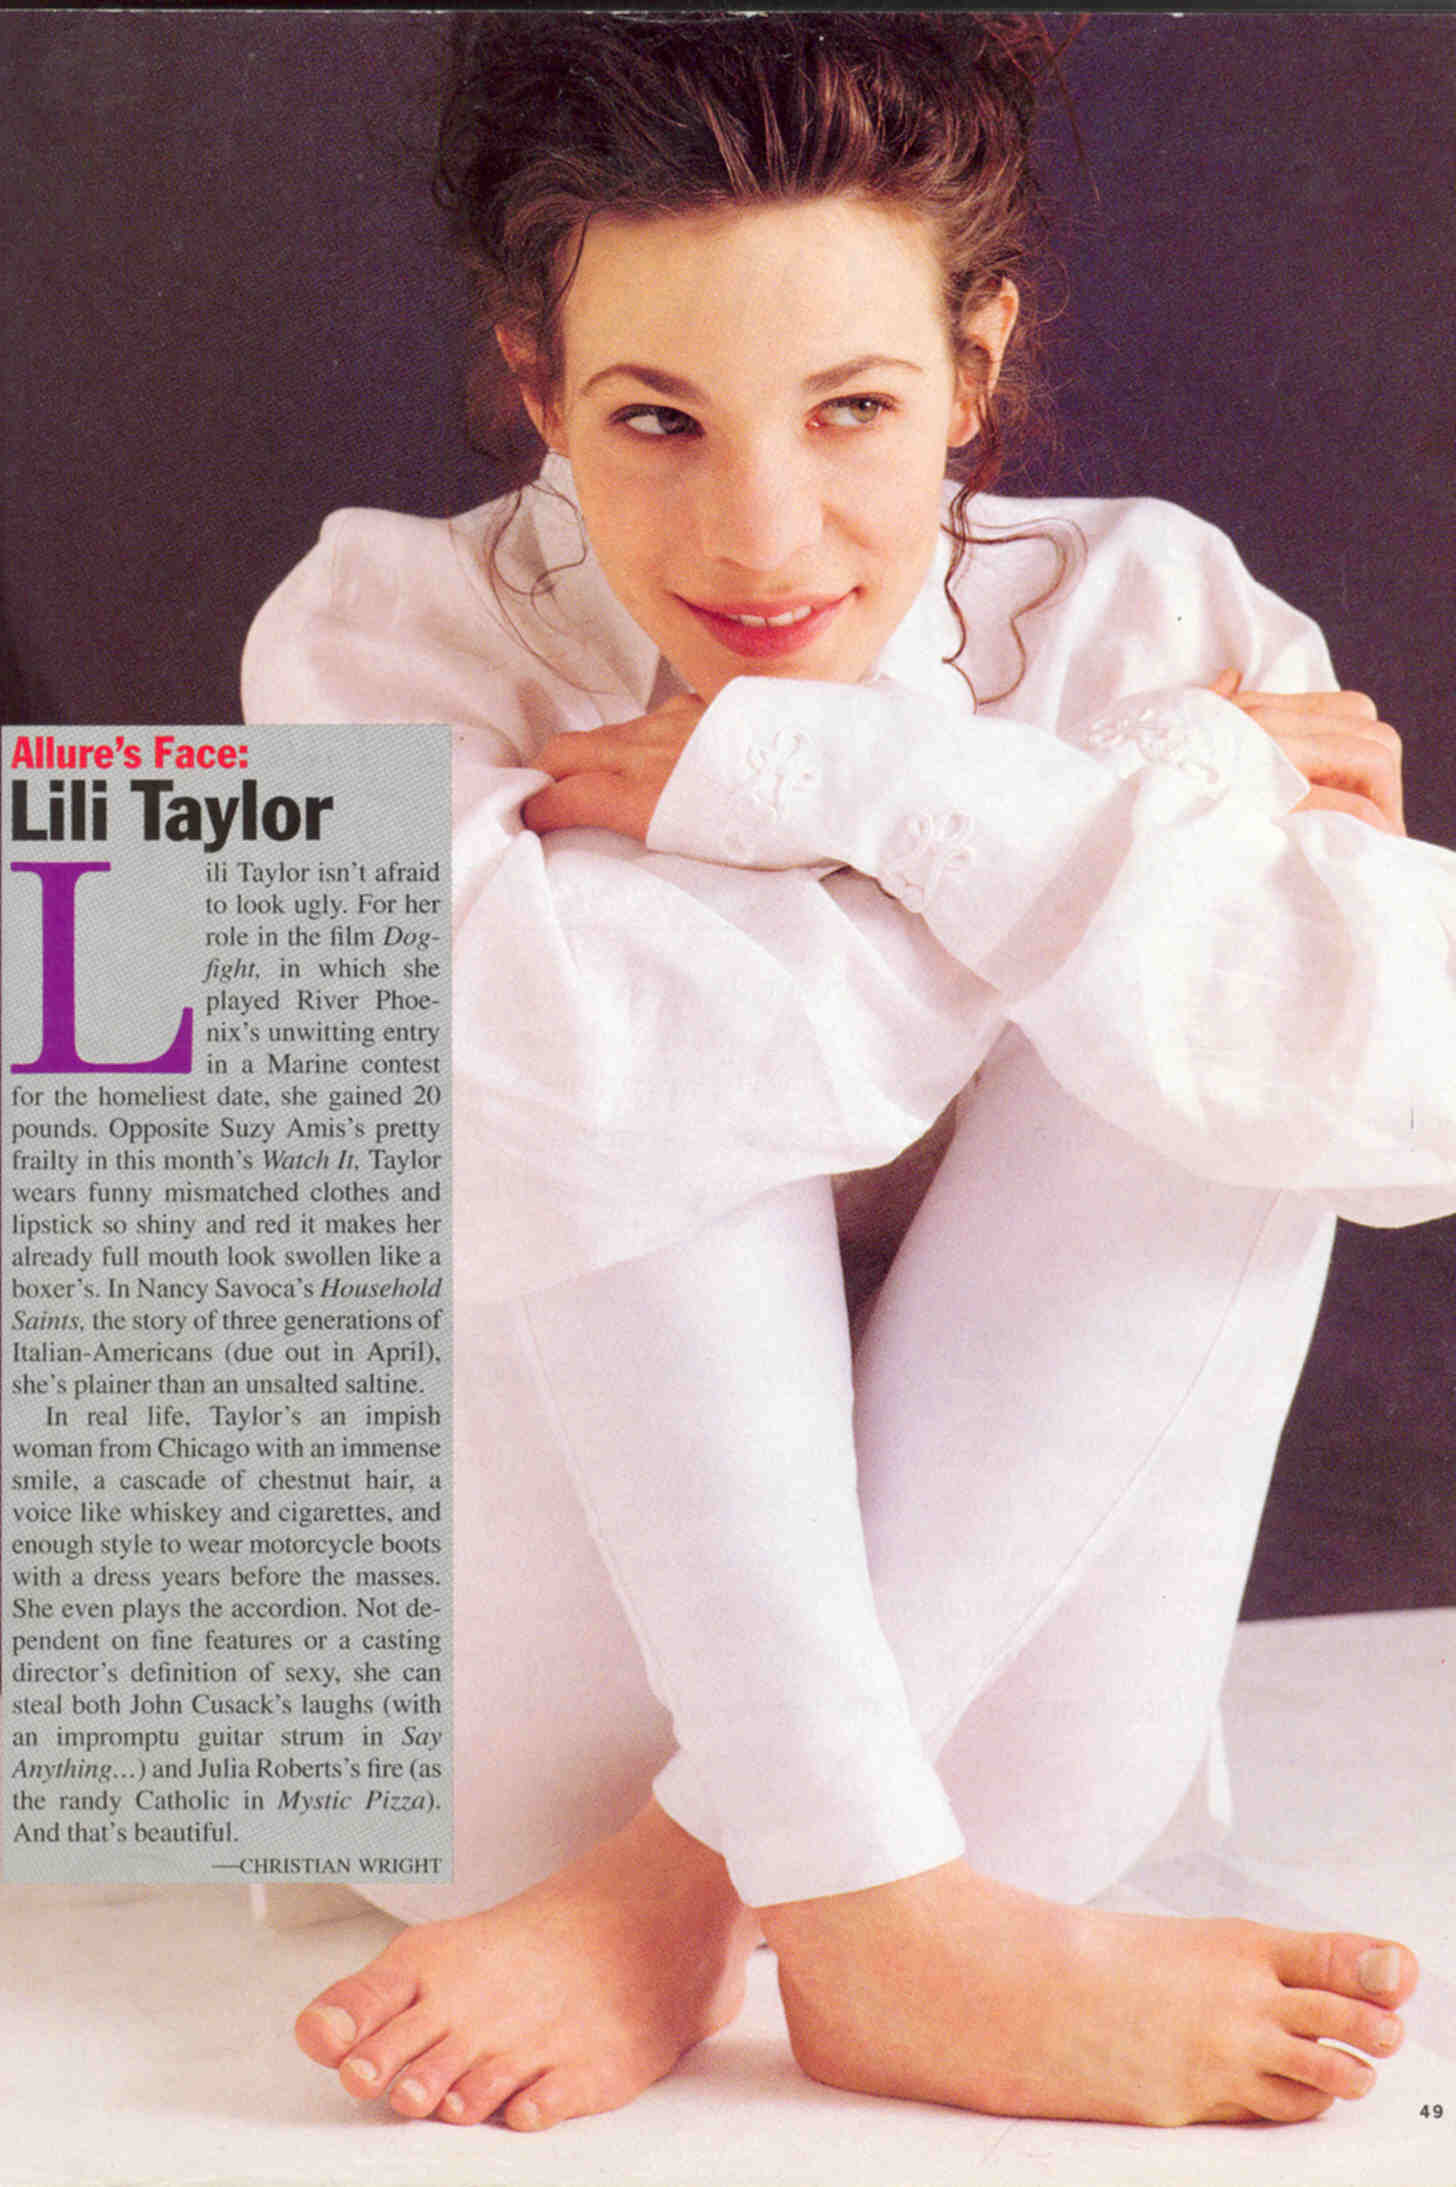 People who liked Lili Taylor's feet, also liked.